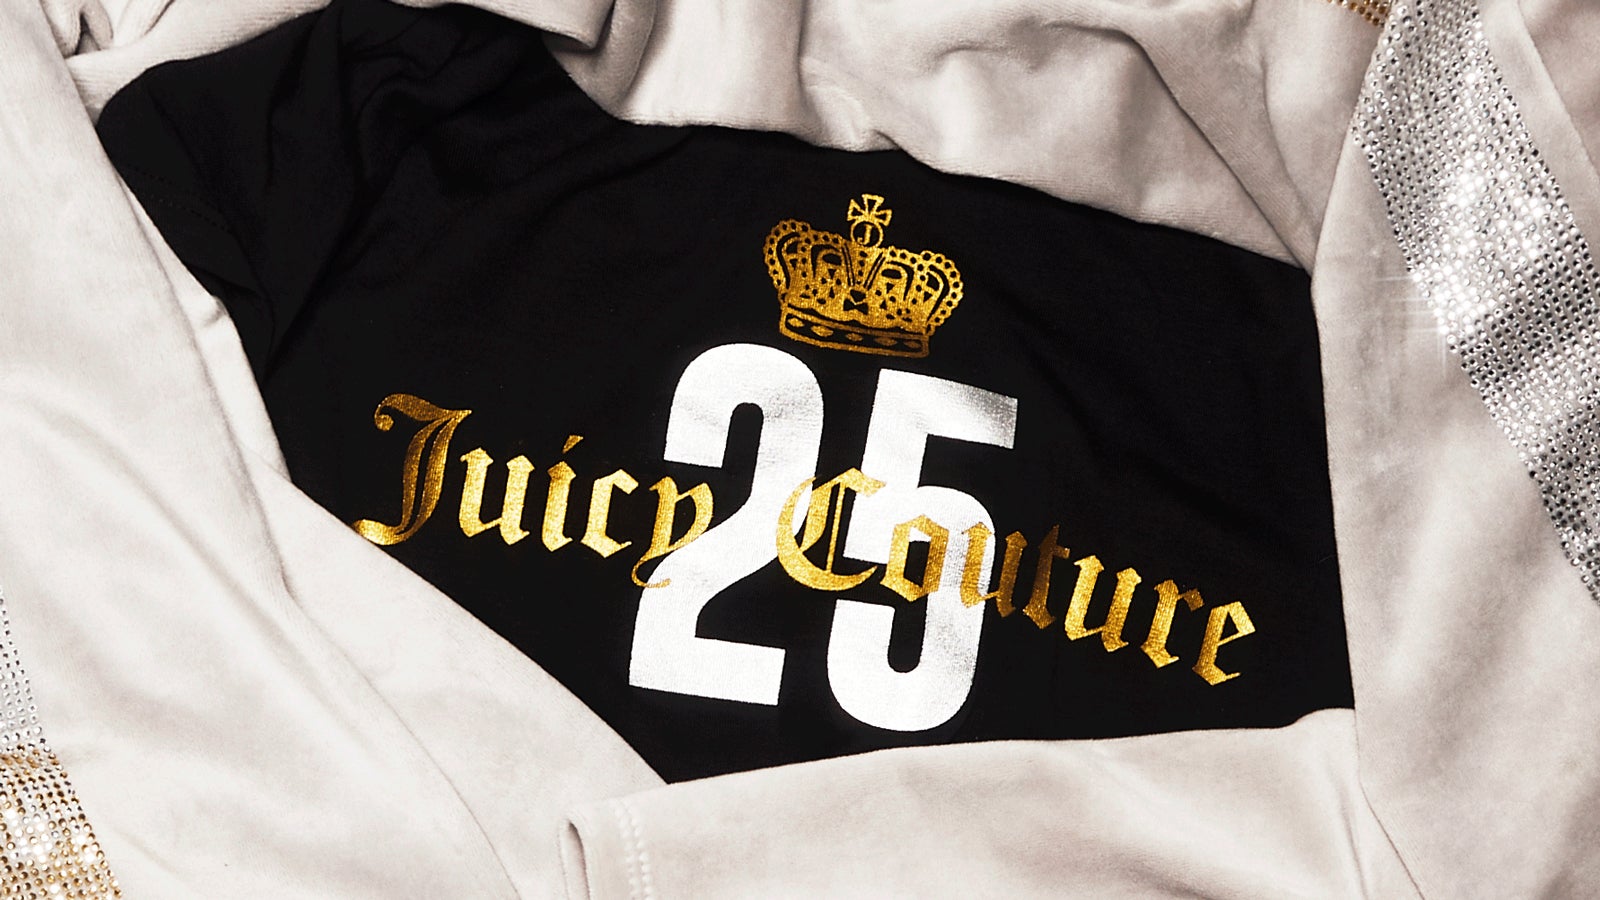 Juicy Couture Celebrates 25 Years